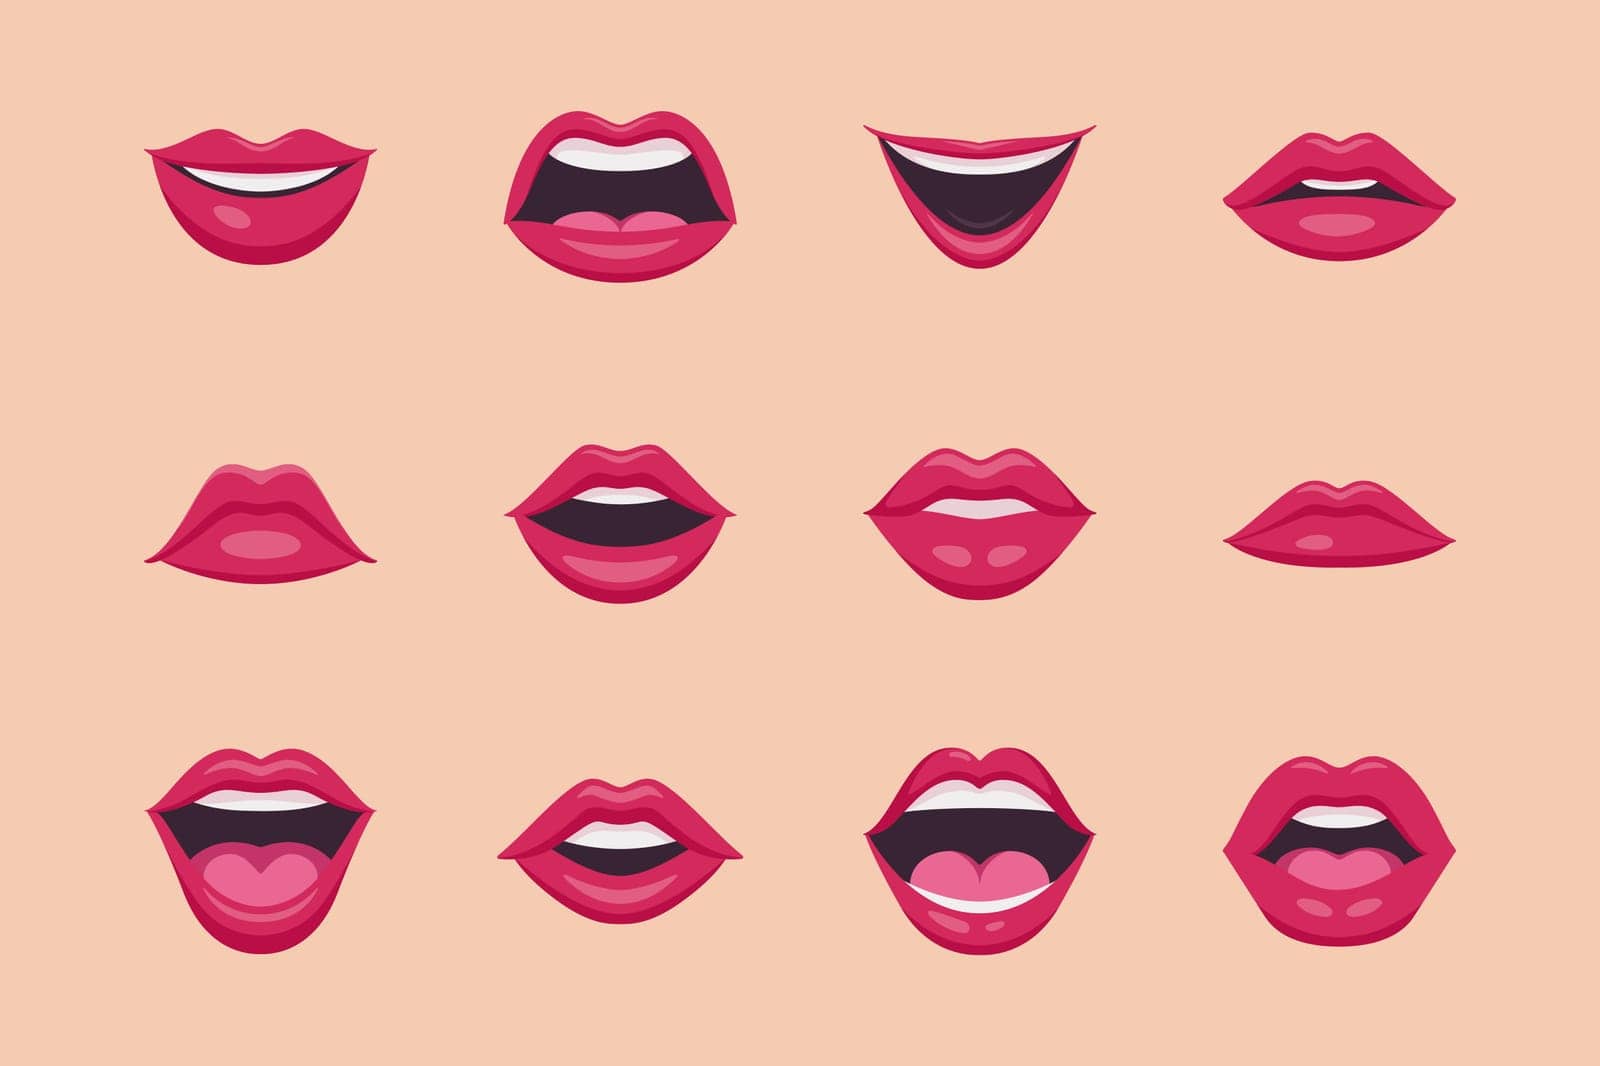 Flat Vector Red Female Lips Icon Set Closeup. Woman Lips, Different Expressions, Emotions. Smile, Kiss, Beauty Concept. Modern Pop Art Cartoon Comic Style, Simple Design.